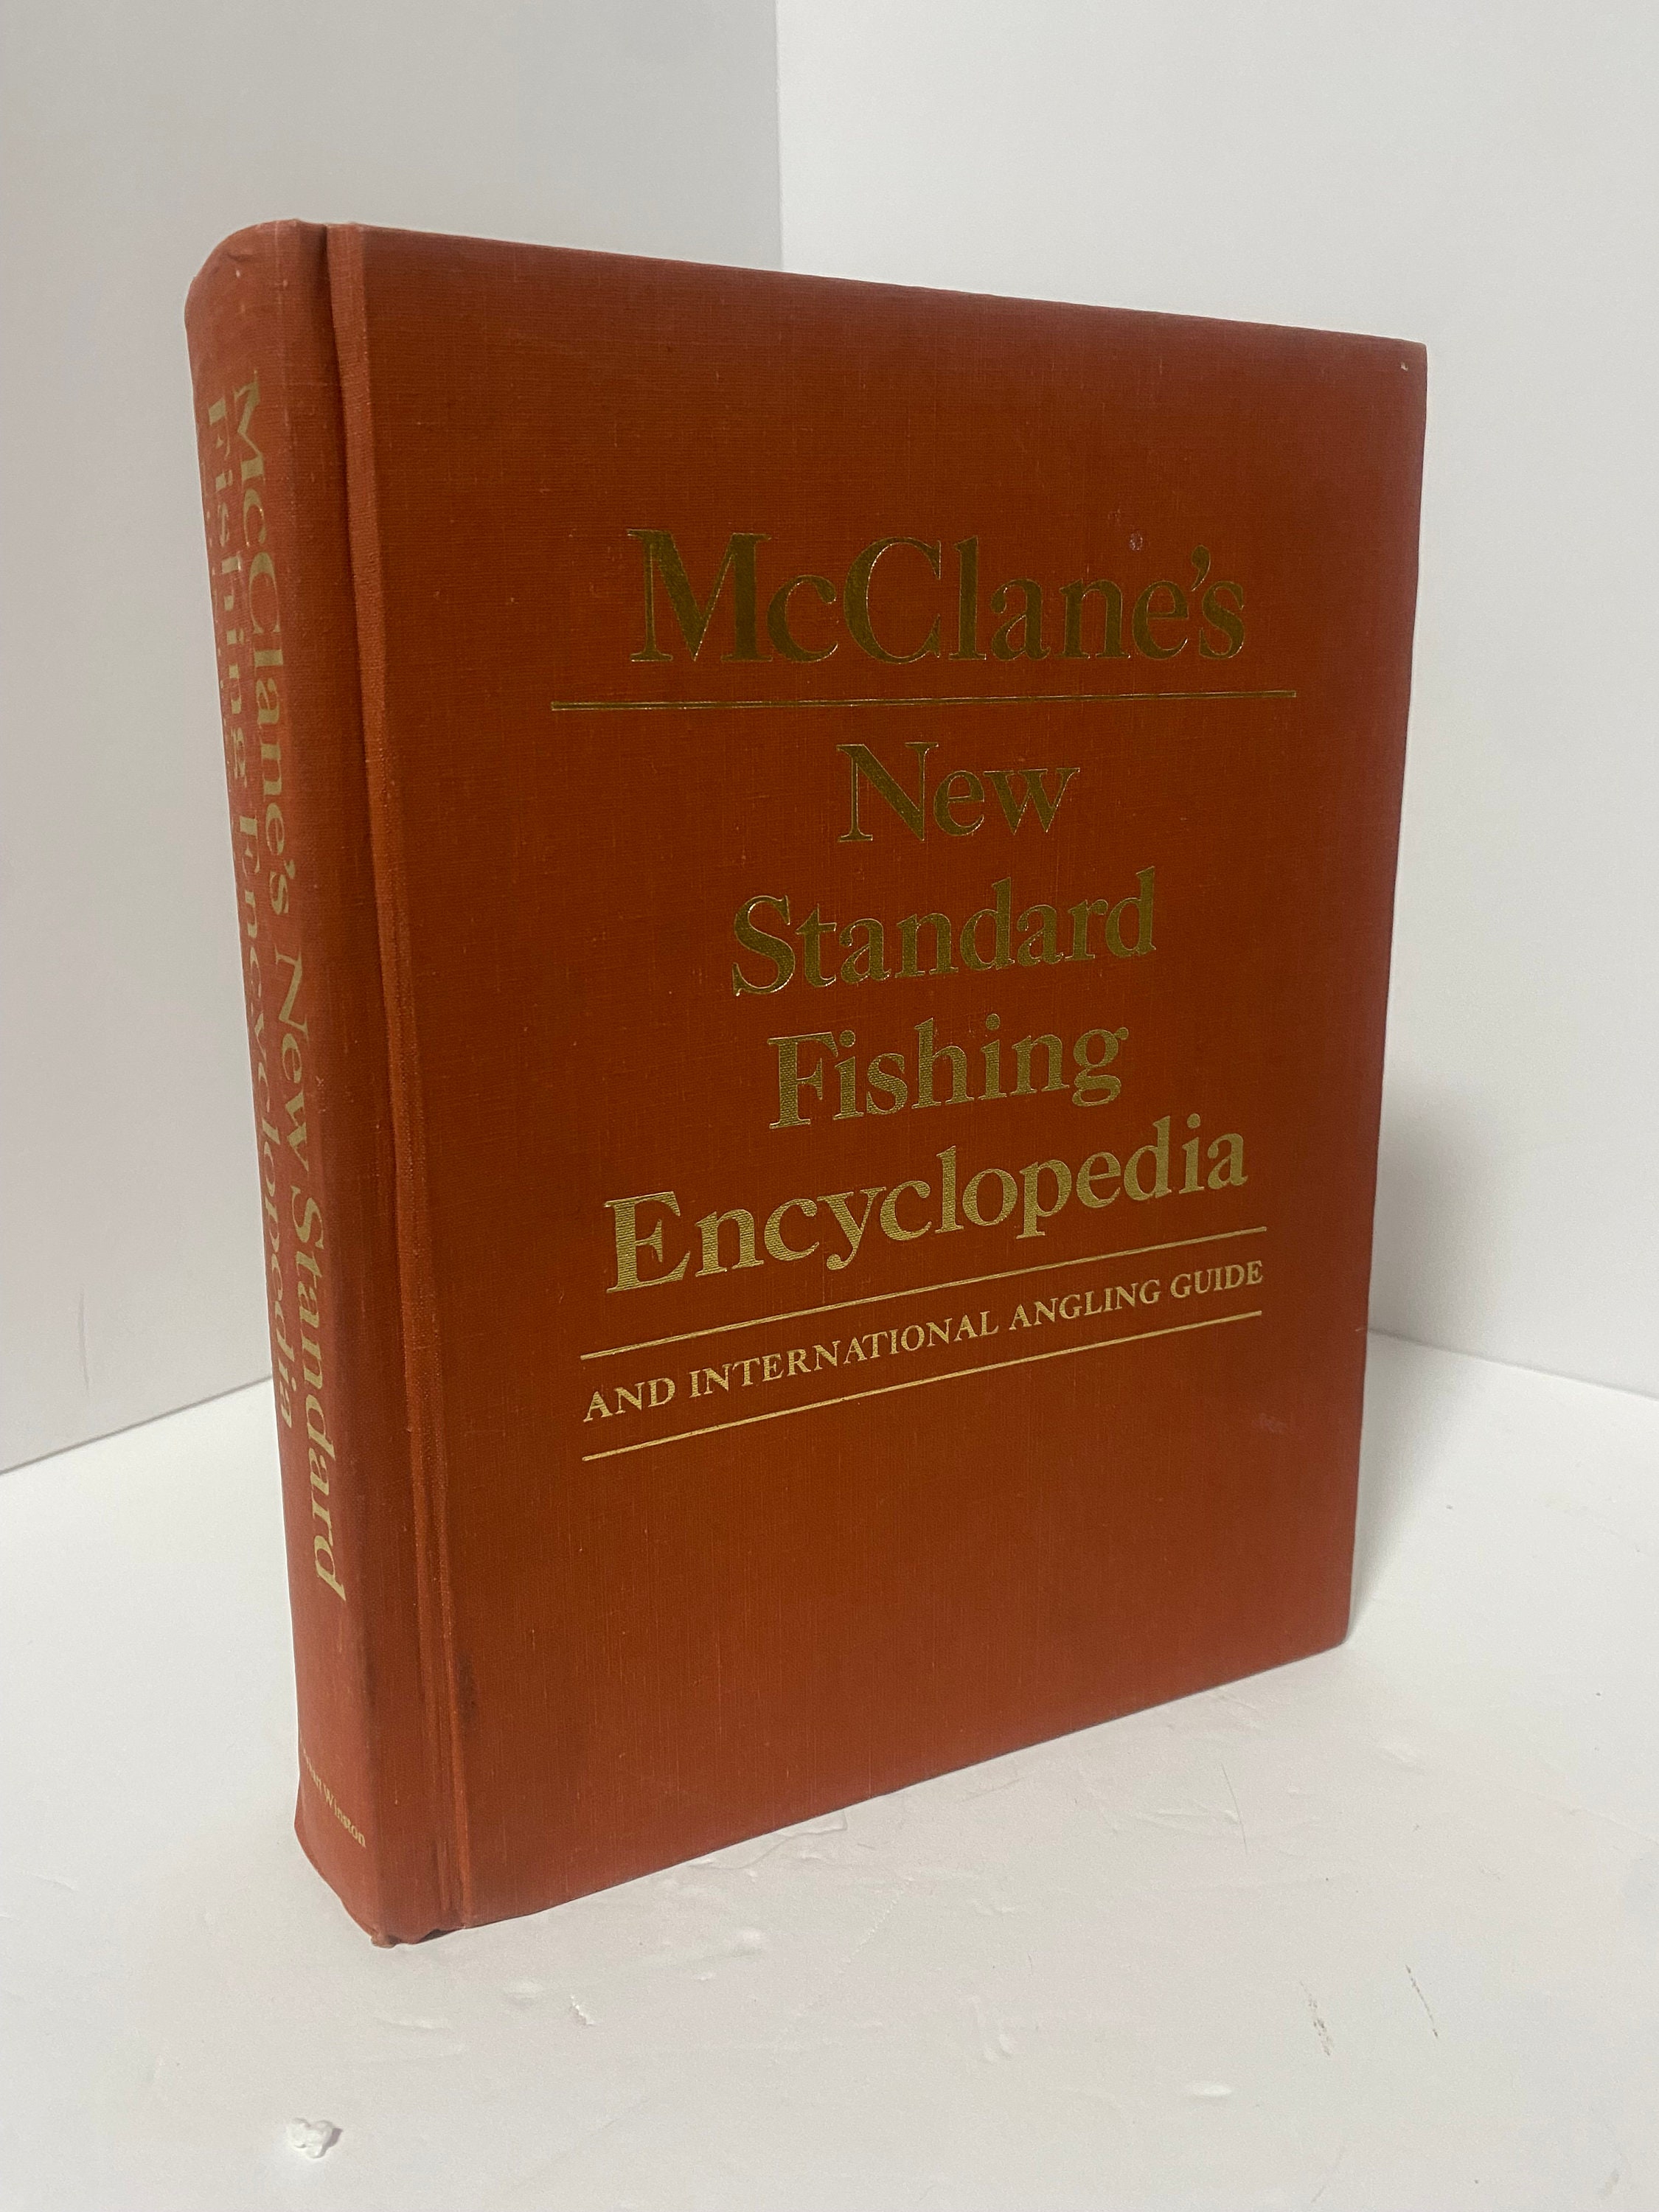 Mcclane's New Standard Fishing Encyclopedia by A.J Mcclane Hardcover 